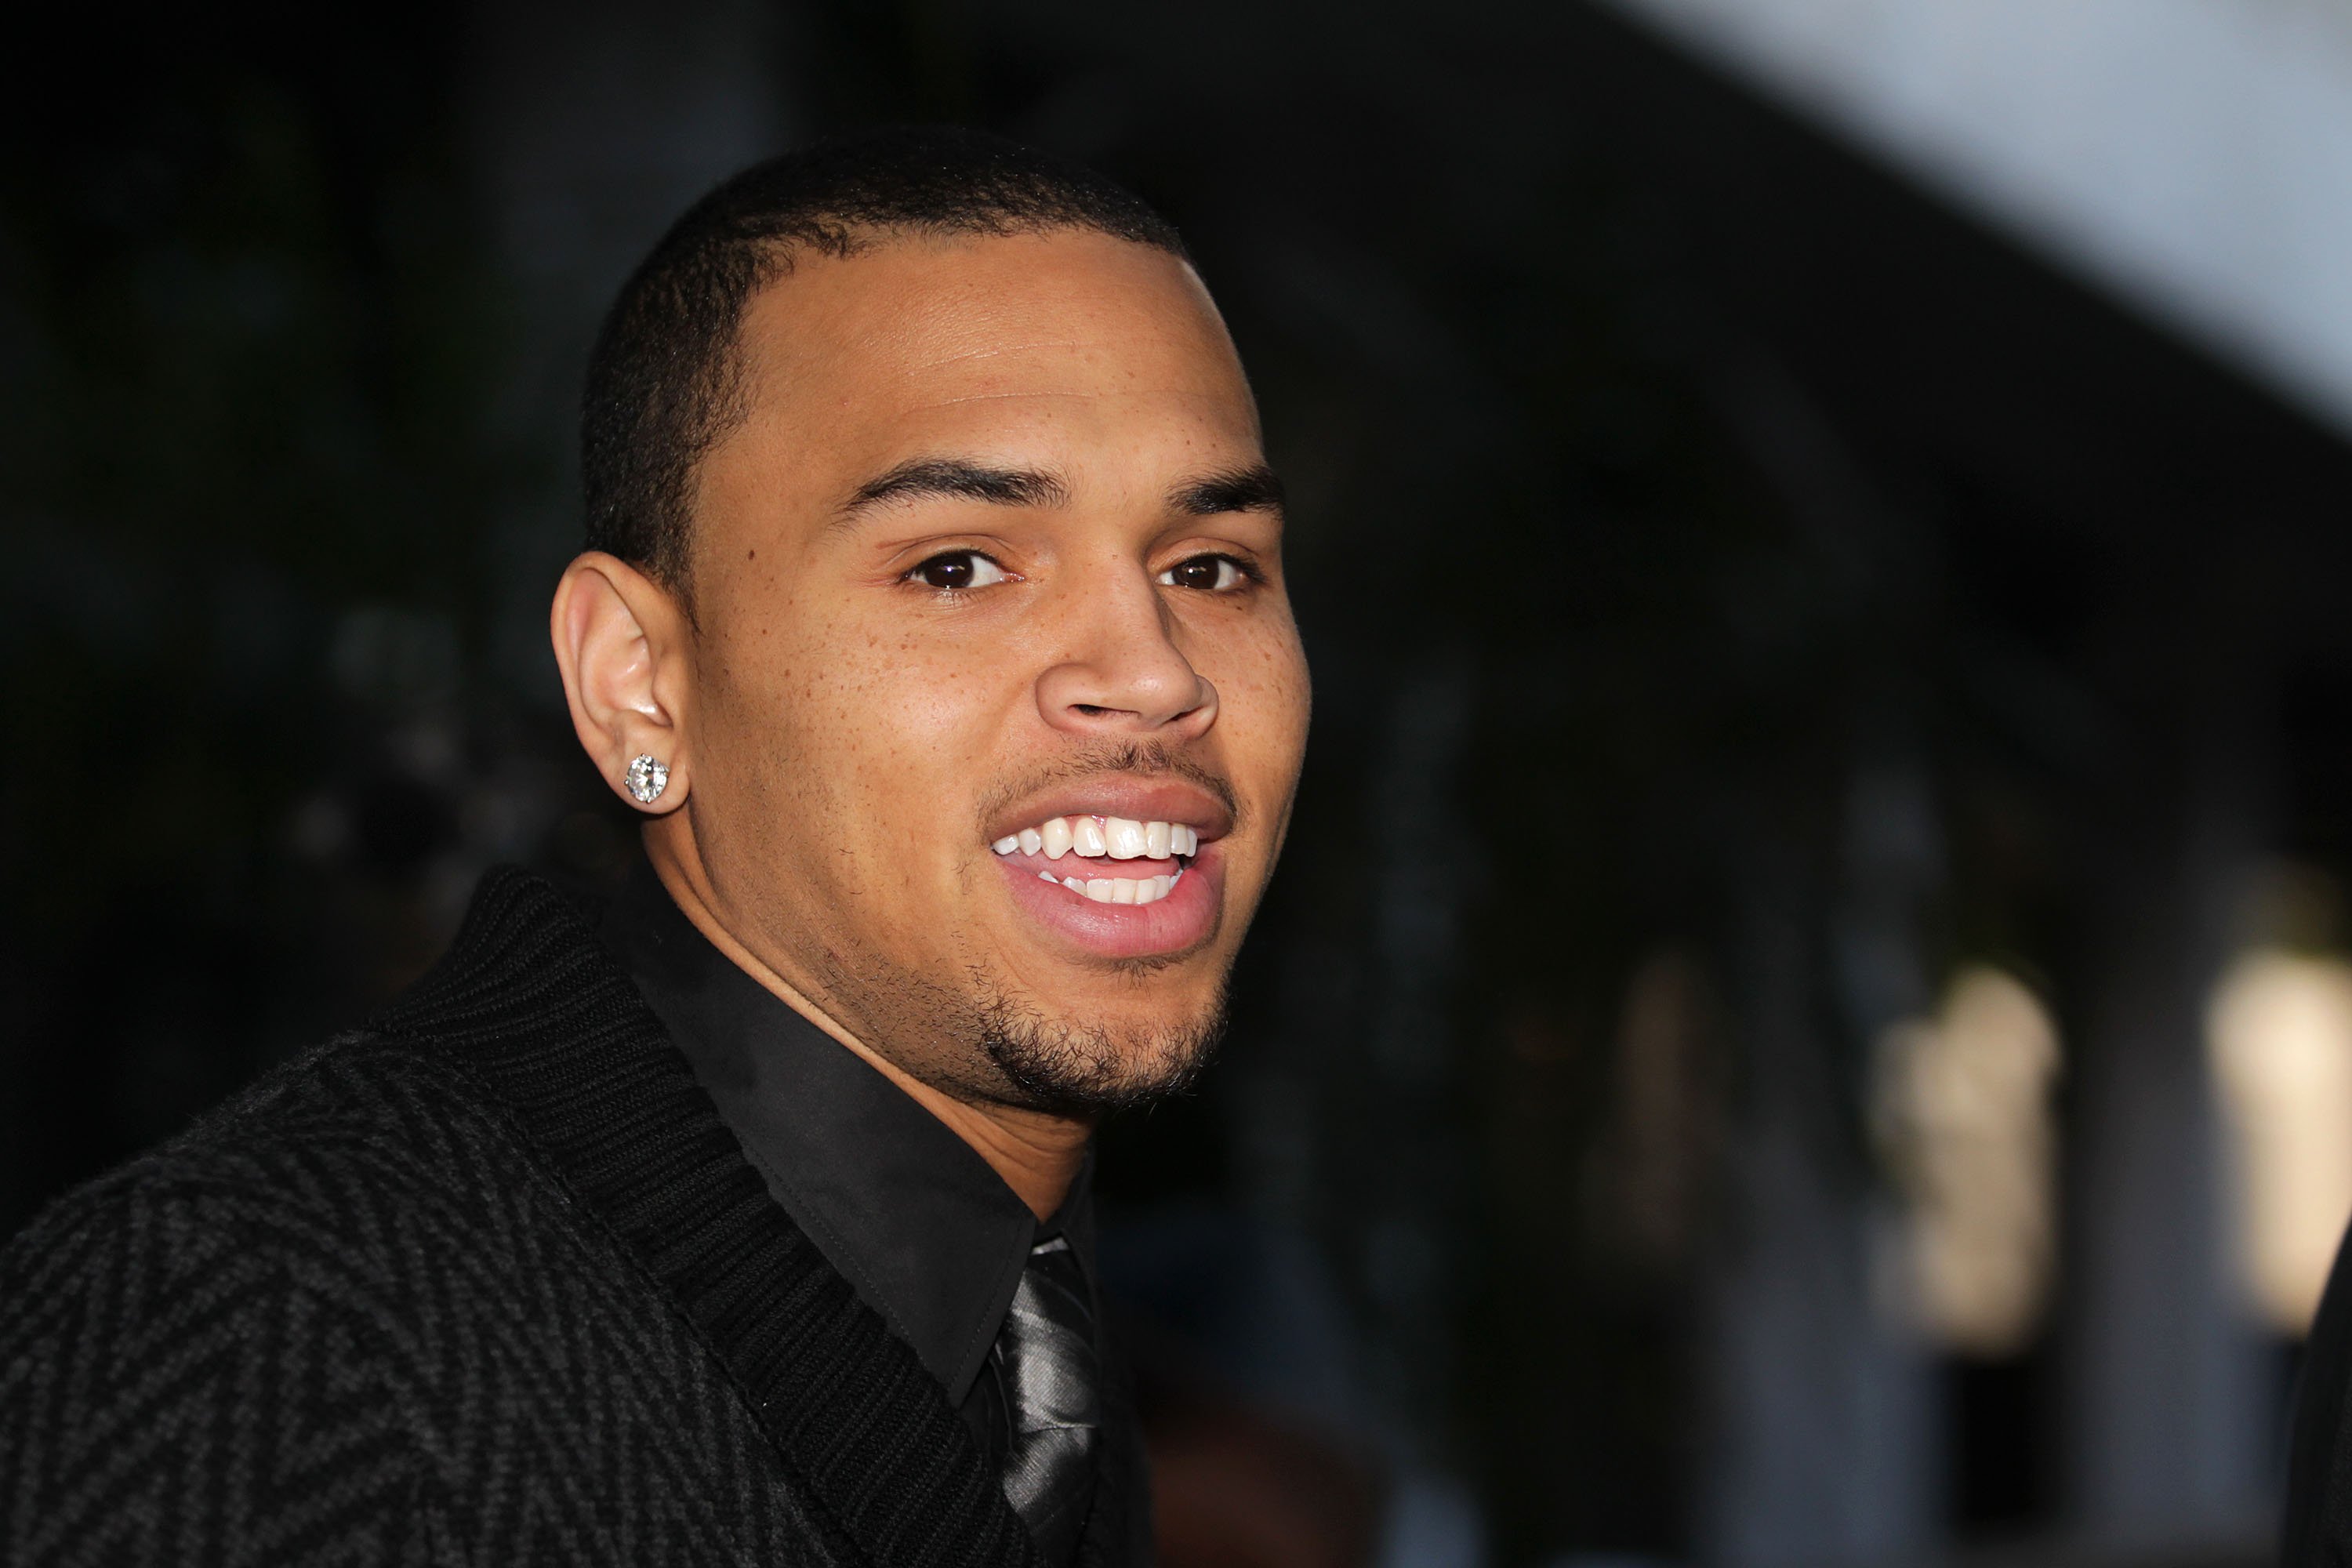 Chris Brown leaves the Los Angeles courthouse after a probation progress hearing on January 28, 2011 in Los Angeles, California. | Photo: Getty Images